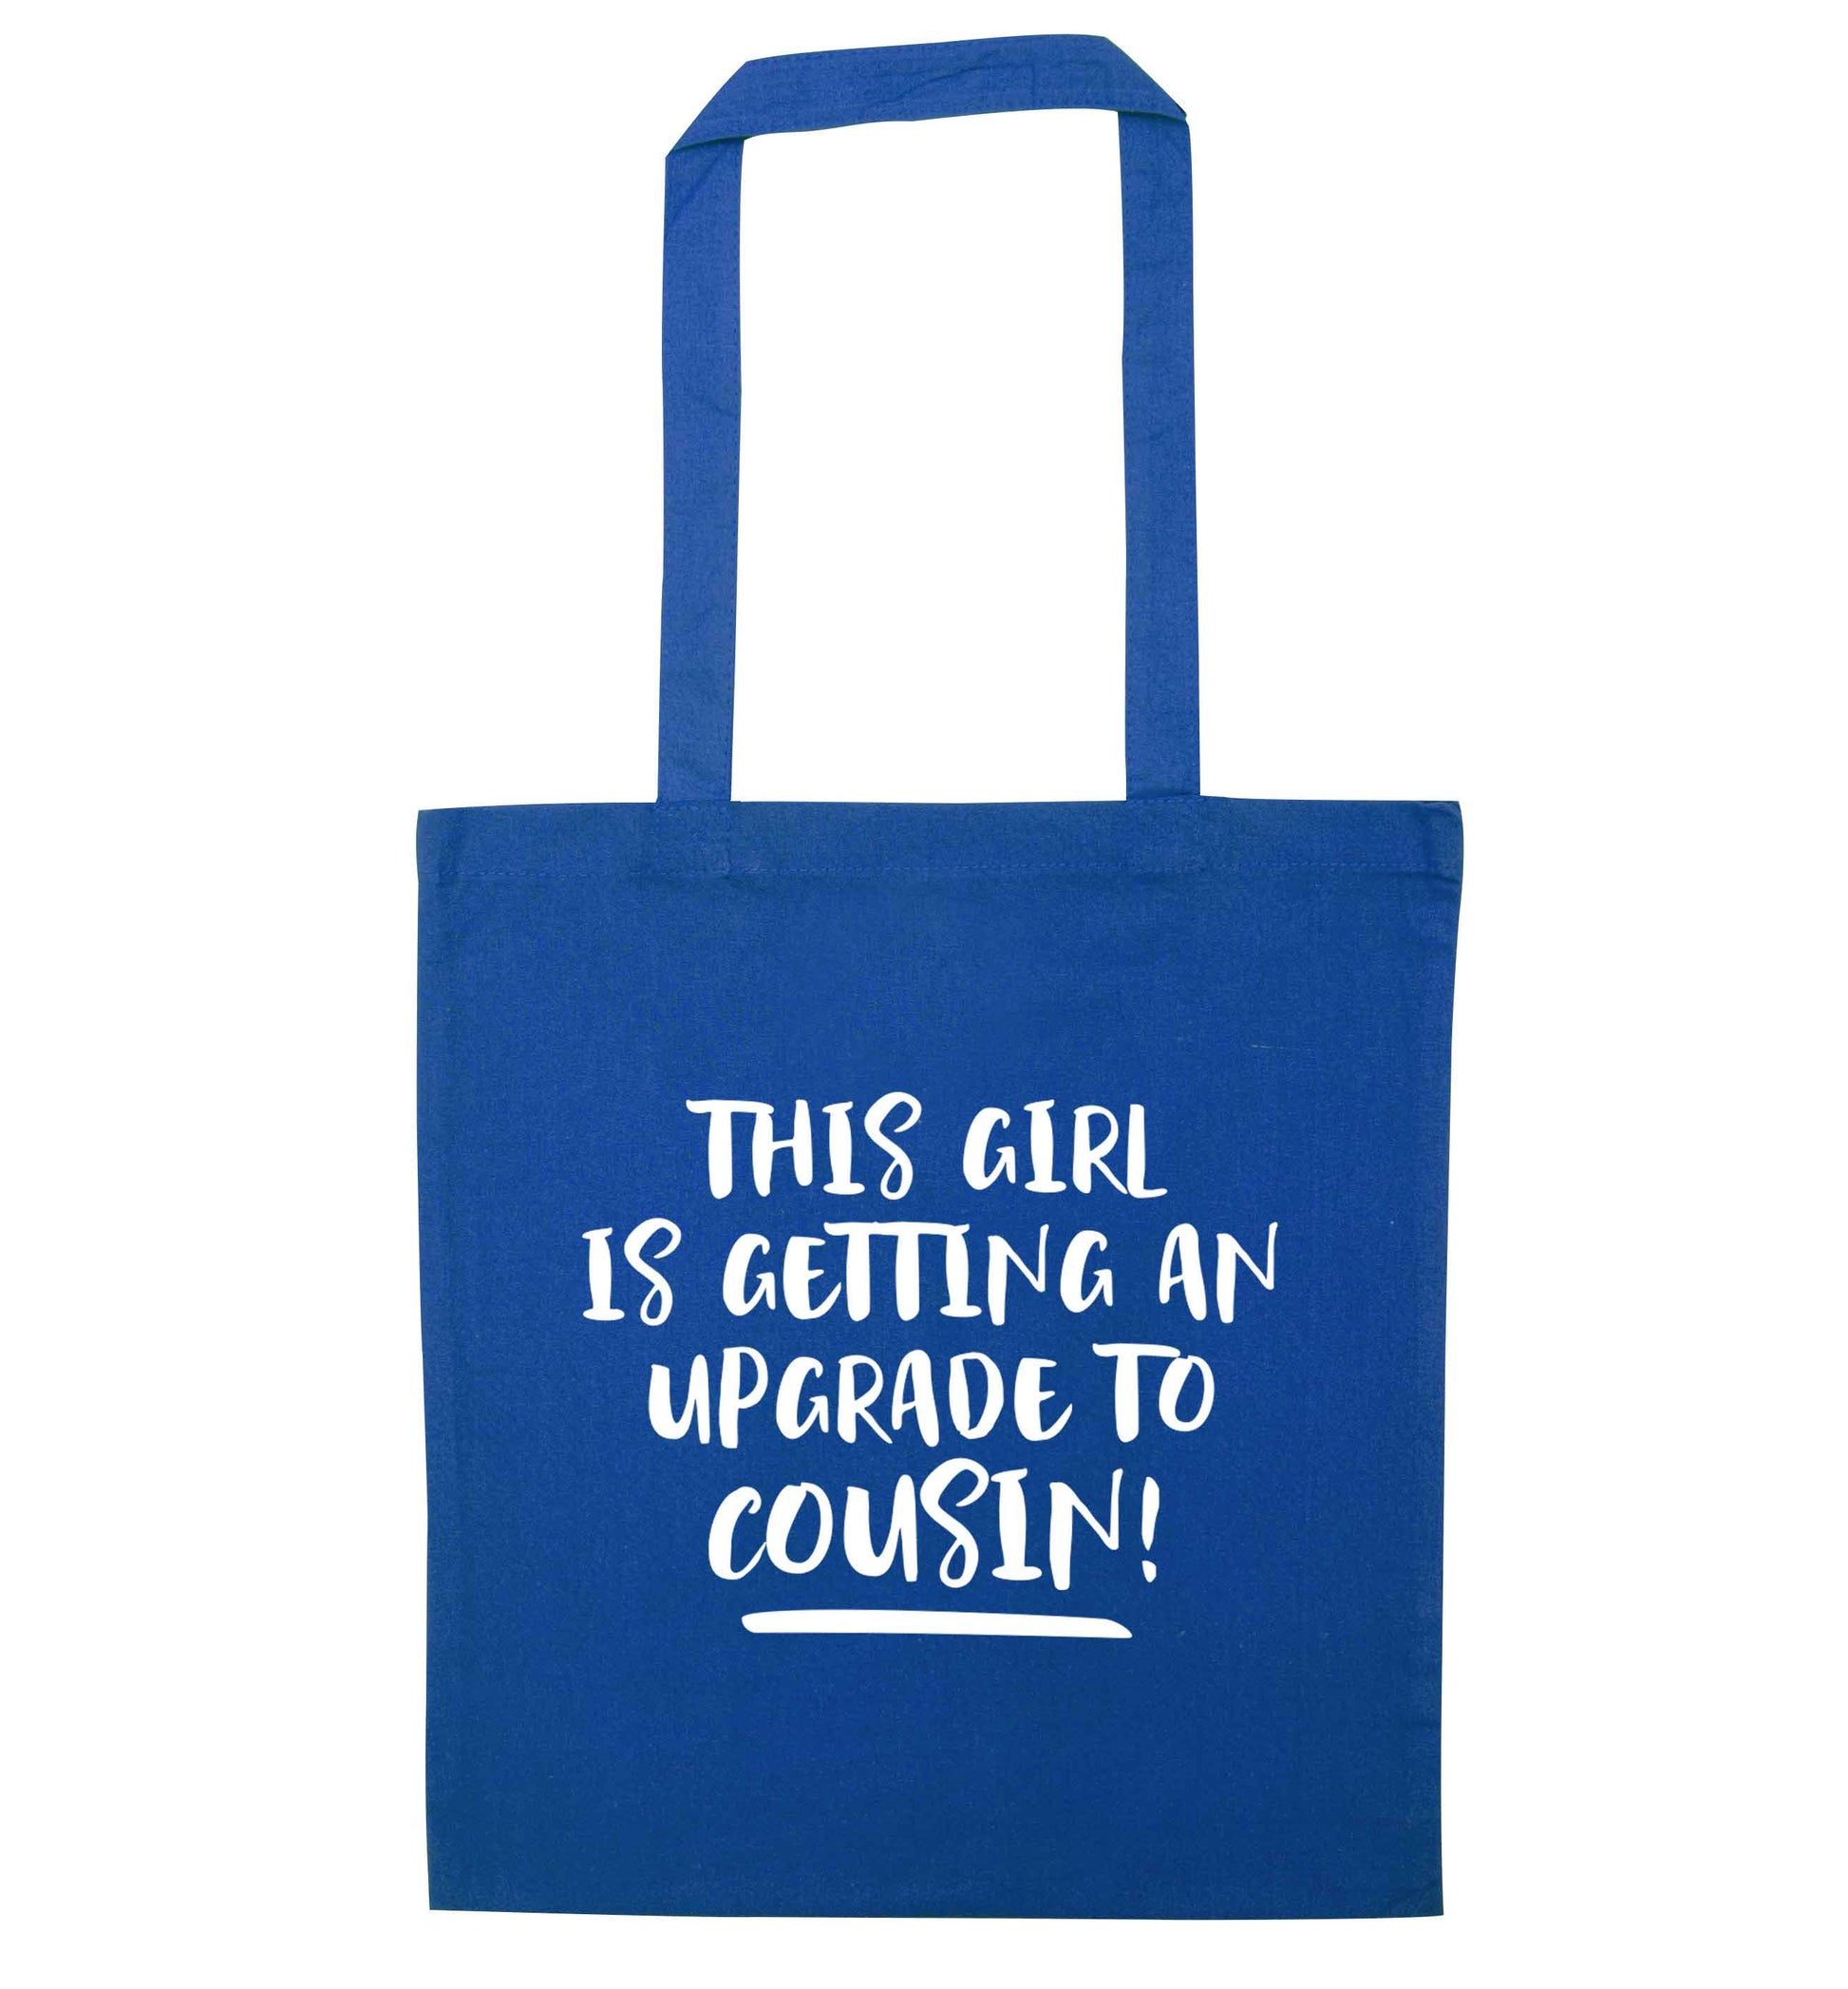 This girl is getting an upgrade to cousin! blue tote bag